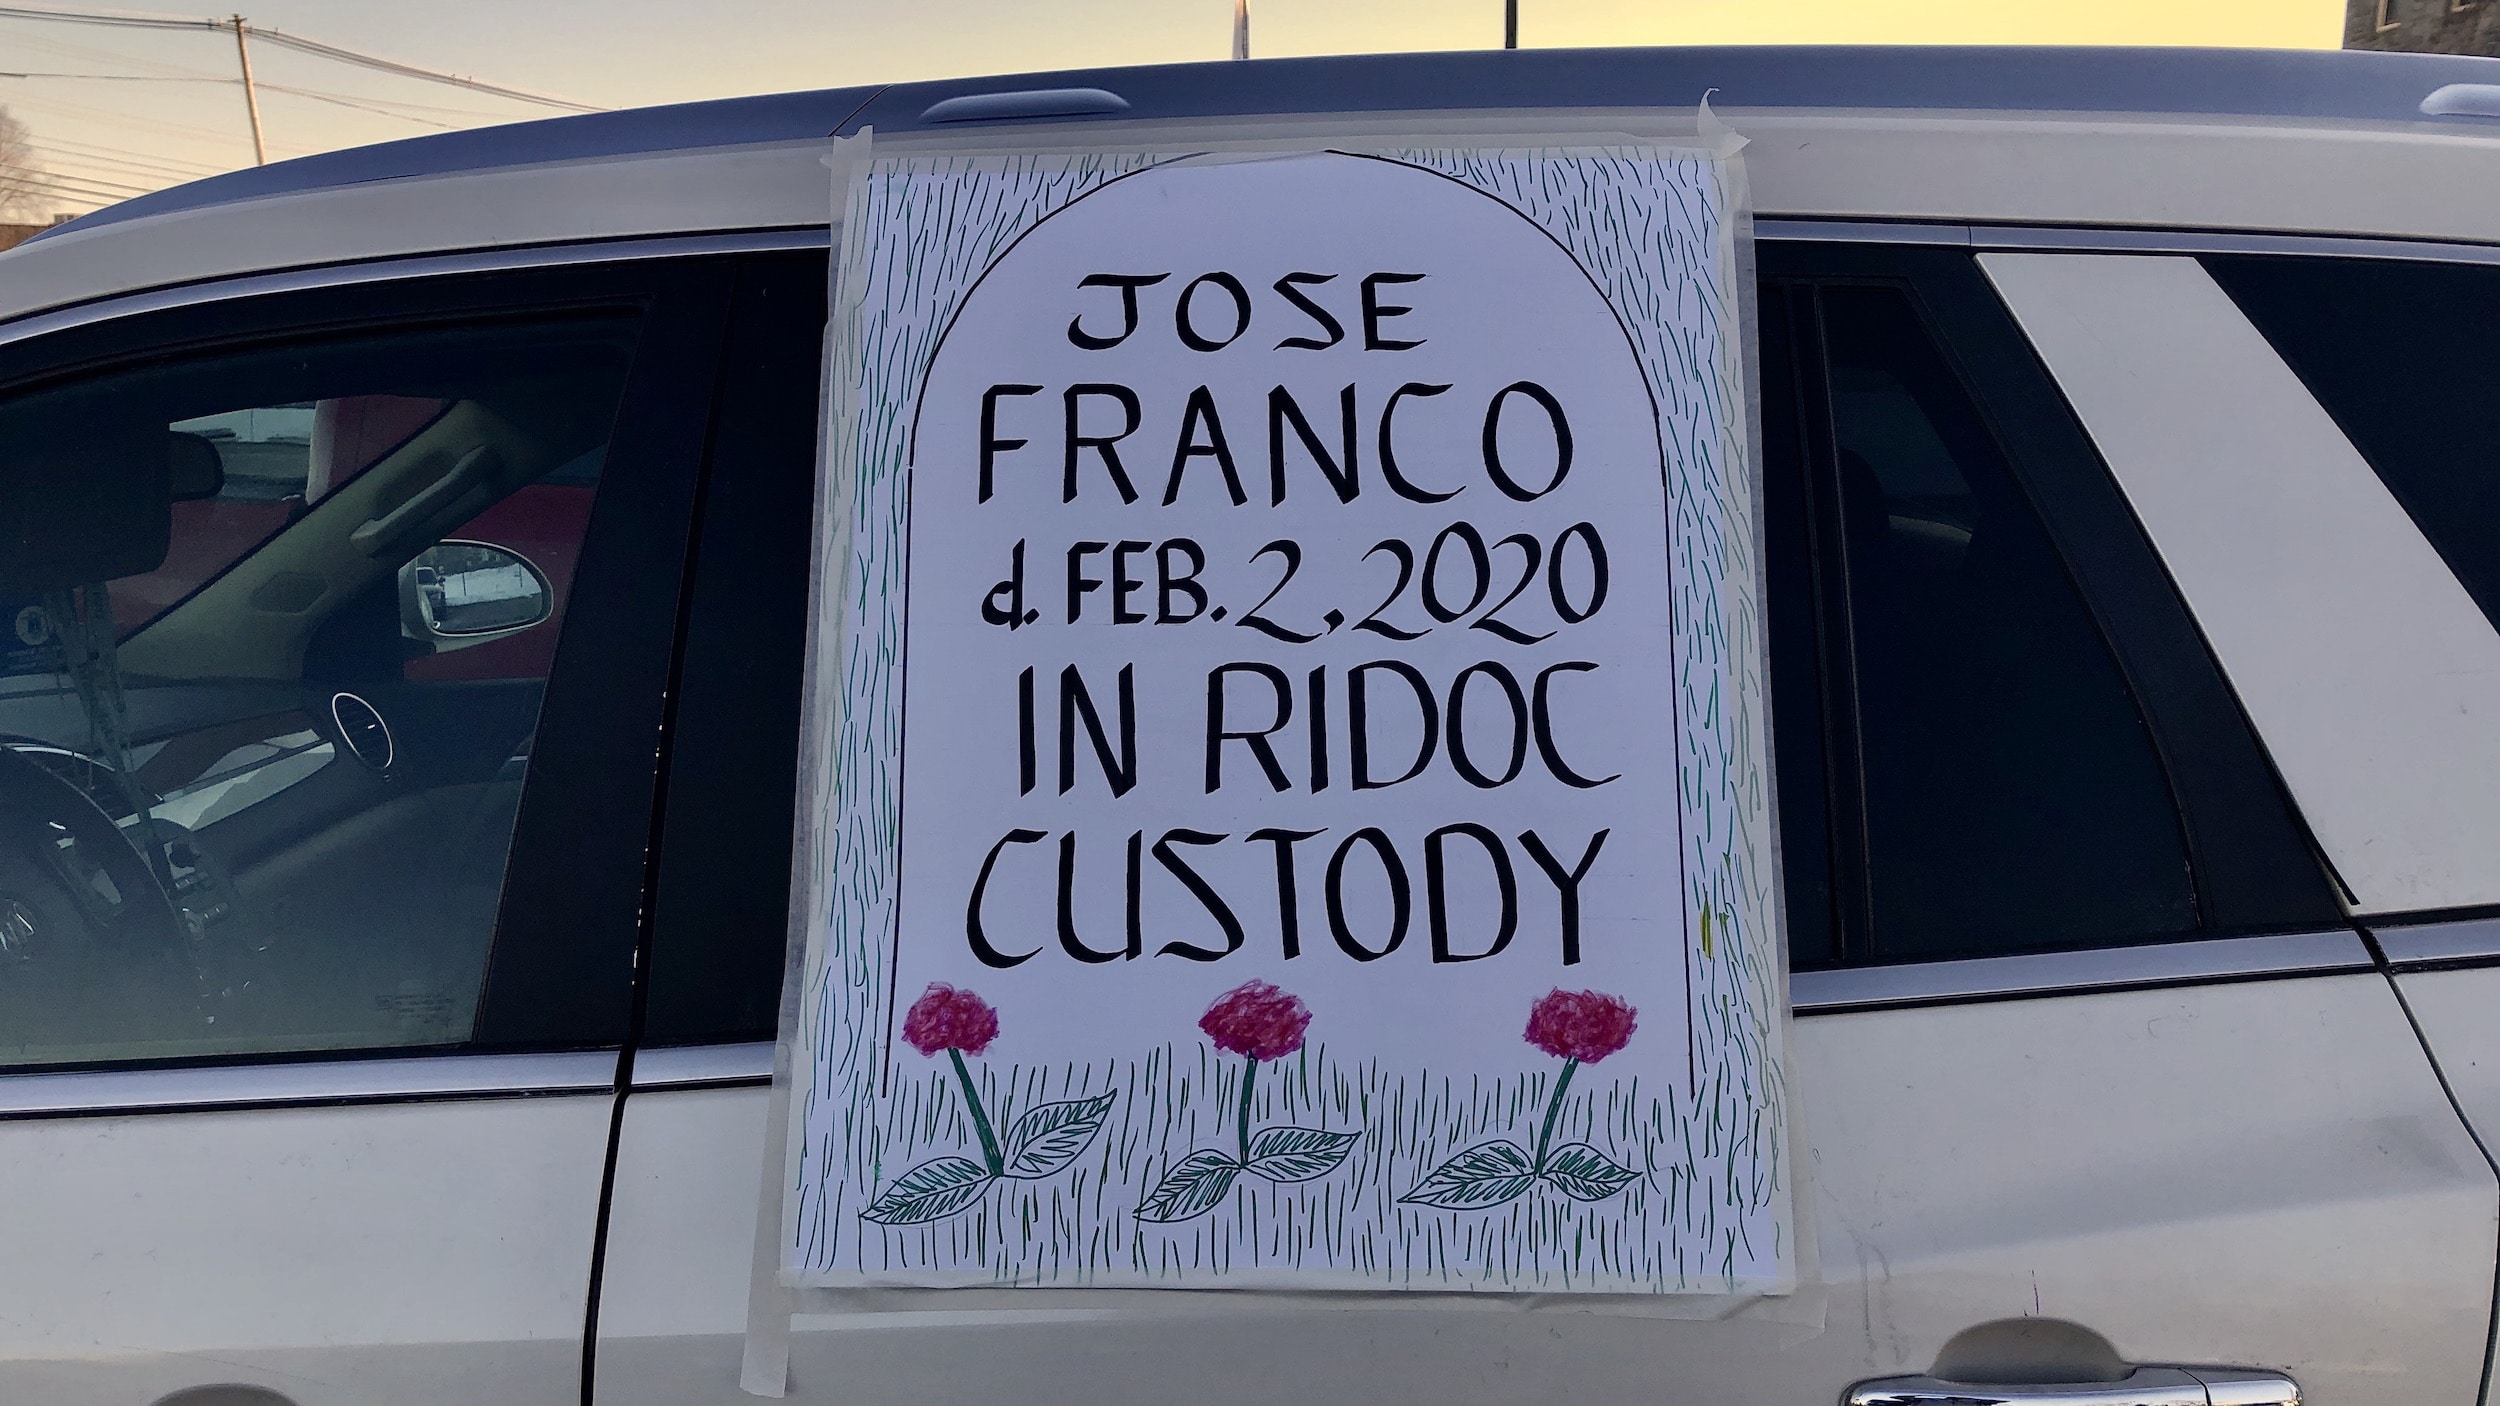 Photo for A car rally in memory of Jose Franco, who died in RIDOC custody